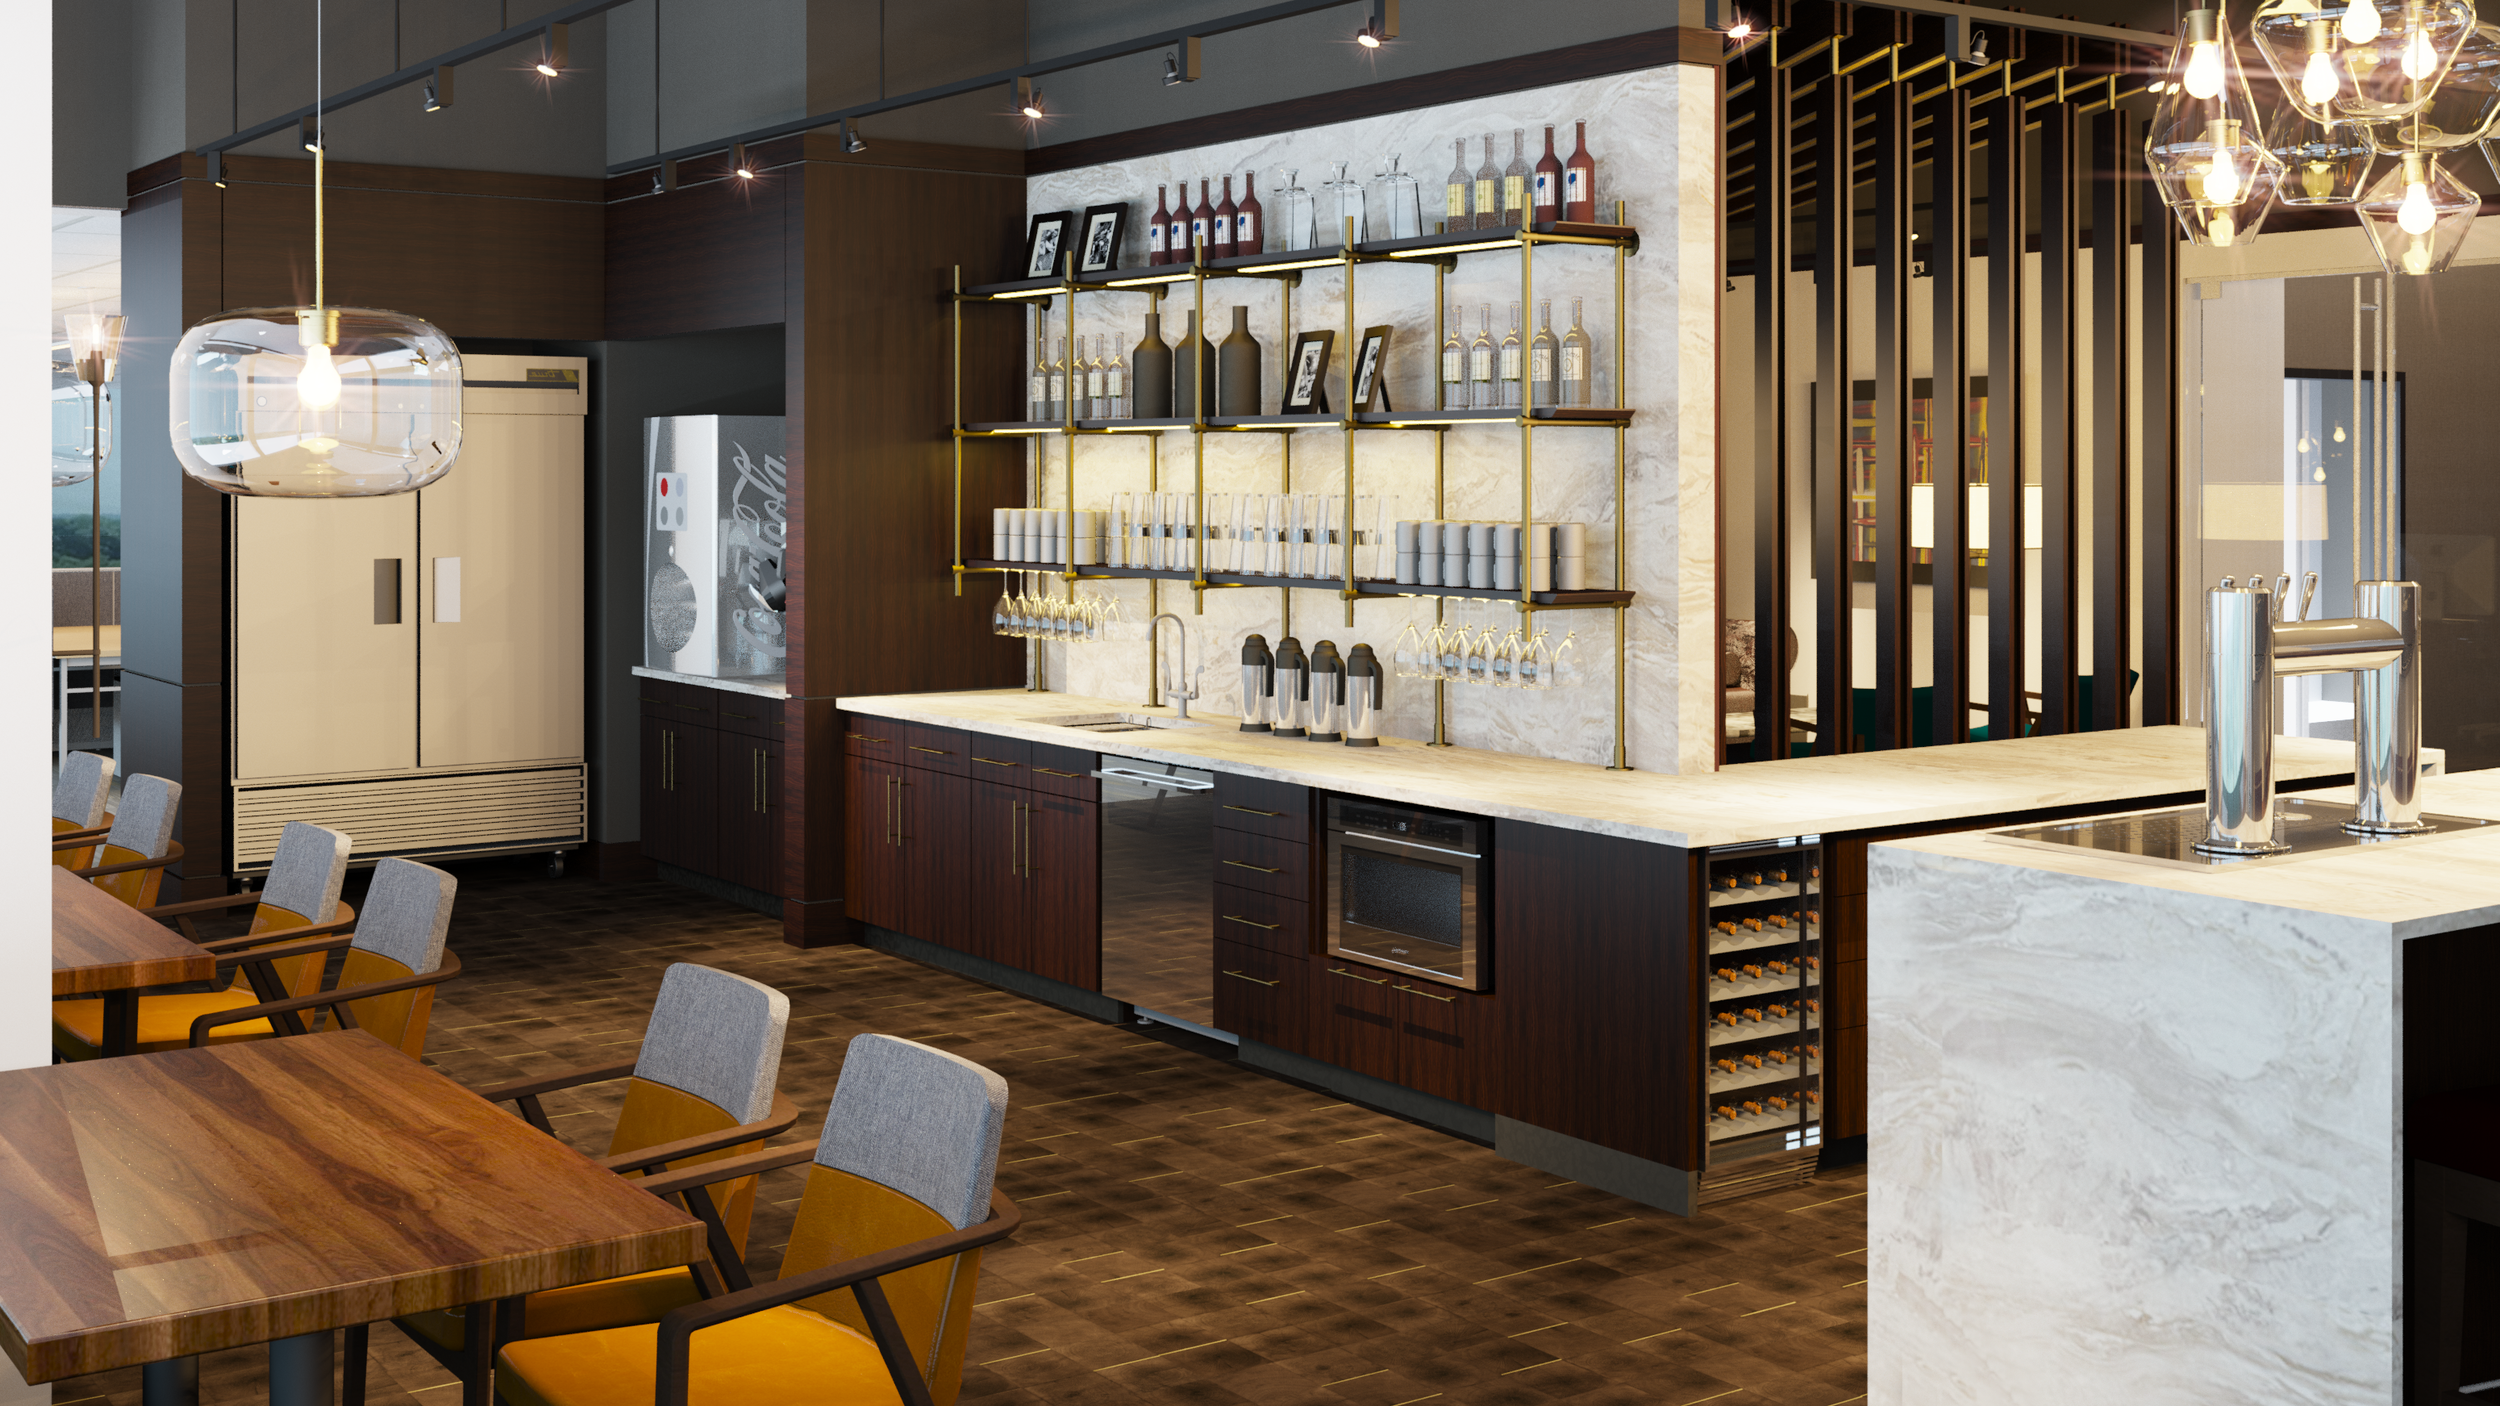 Coopers_Hawk_Hospitality_Kitchen with glow.png